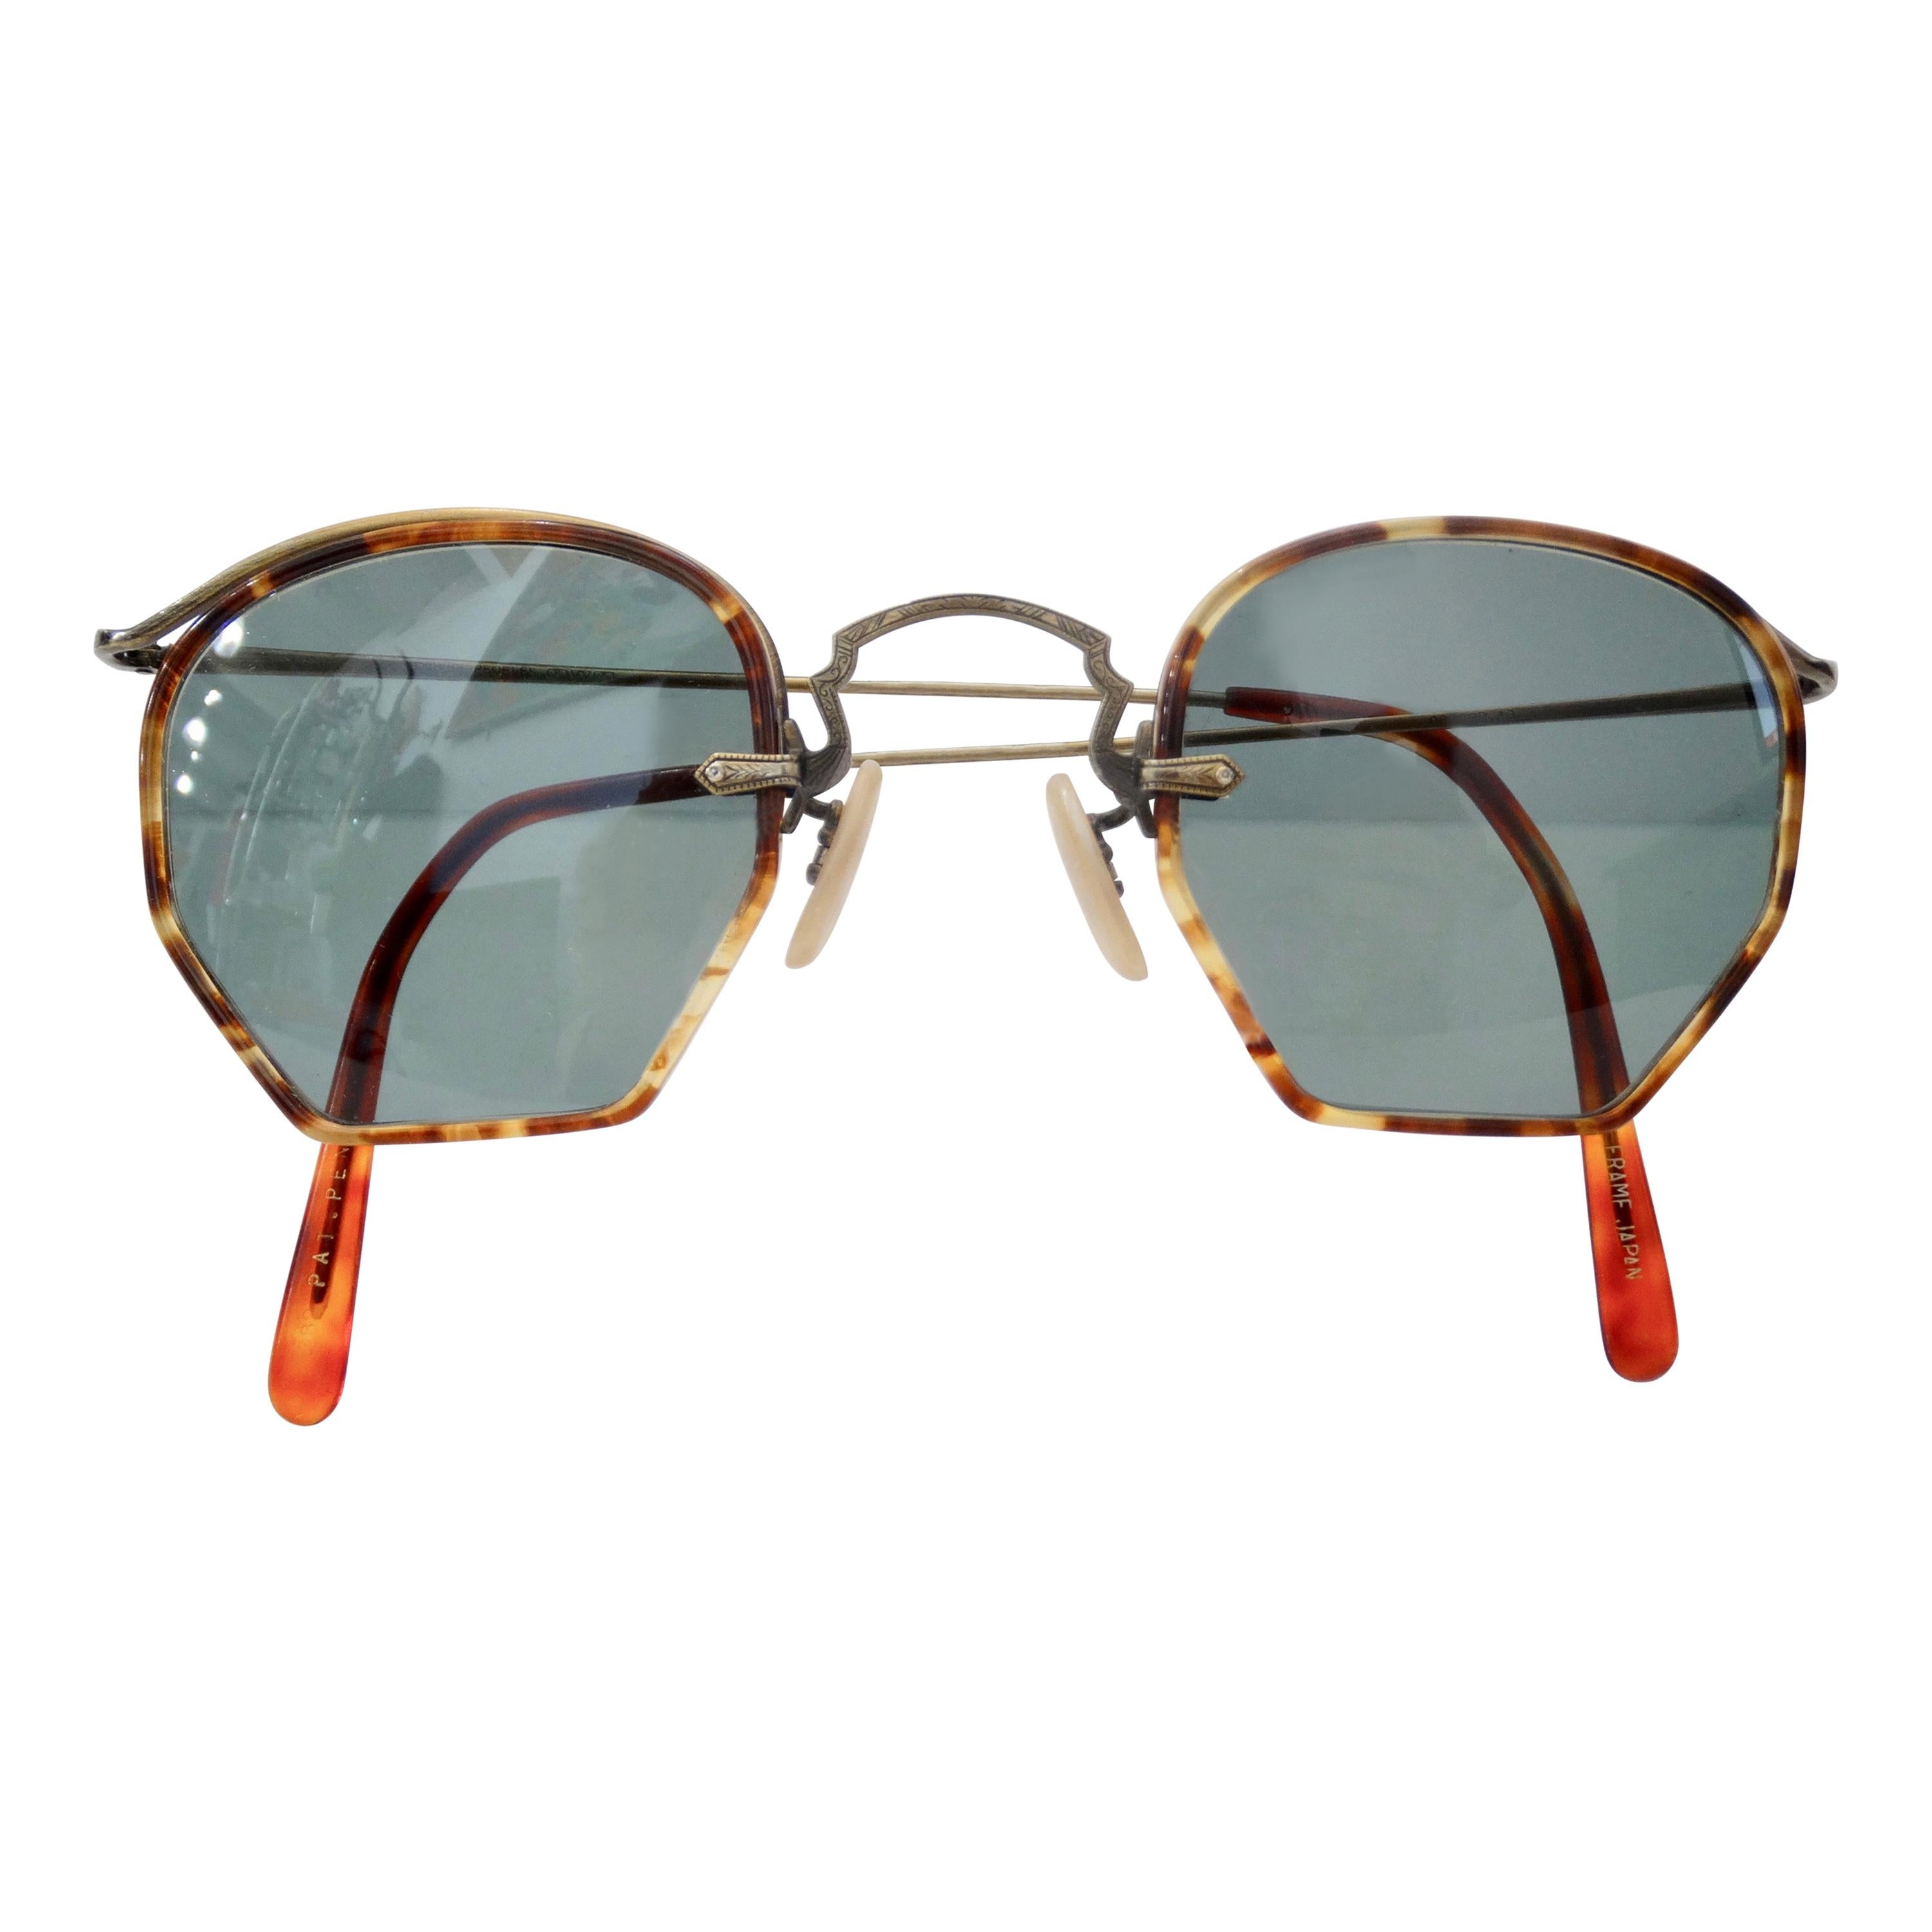 Oliver Peoples 1980s Tortoise Shell Sunglasses